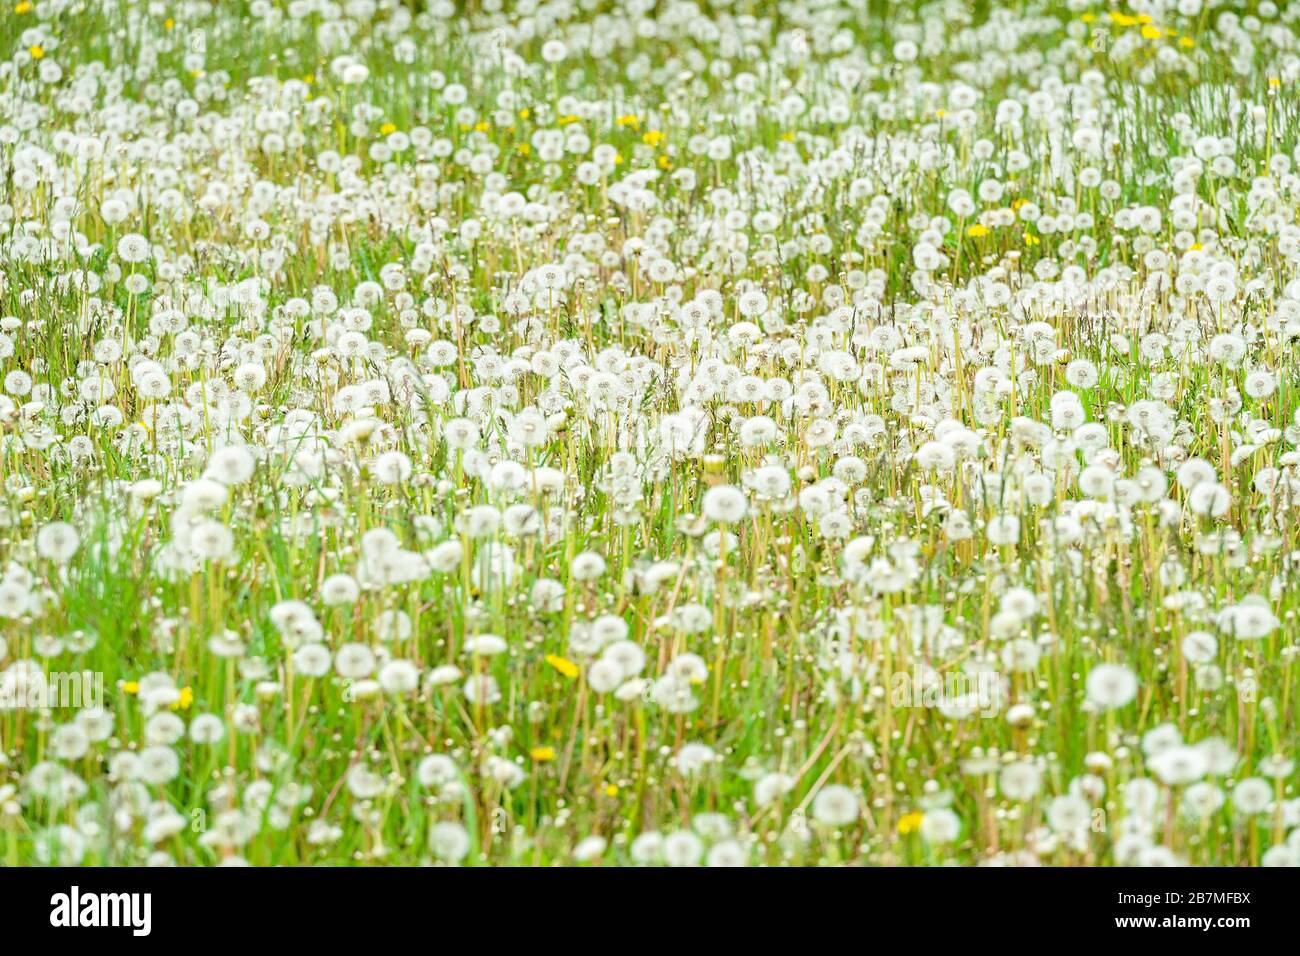 A field of dandelions gone to seed. Stock Photo